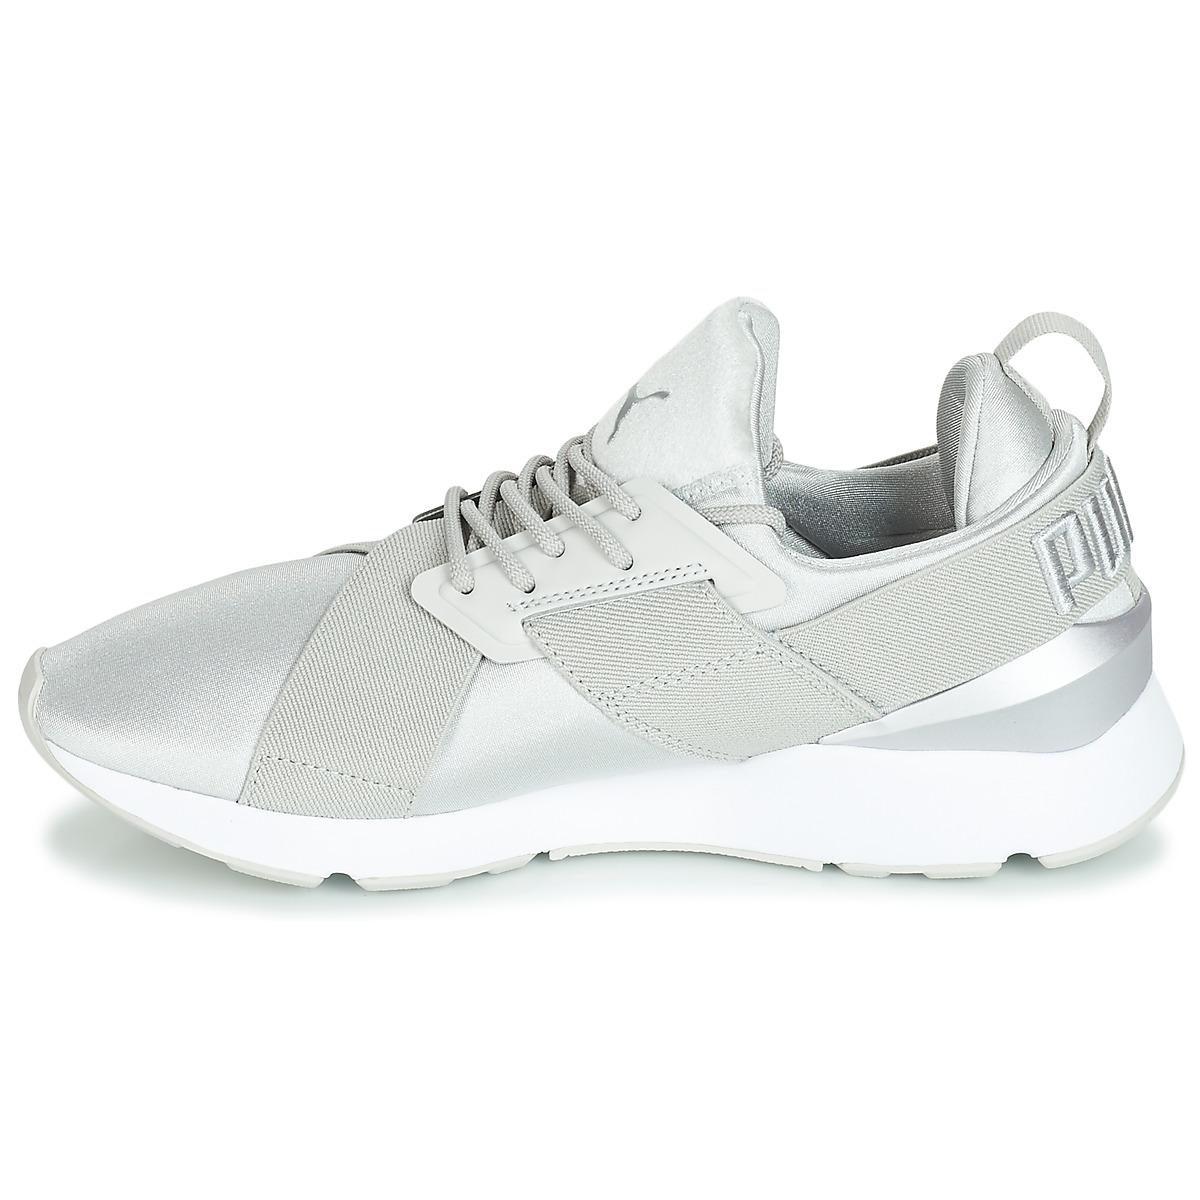 PUMA Wn Muse Satin Ii.gray Shoes (trainers) - Save 3% - Lyst